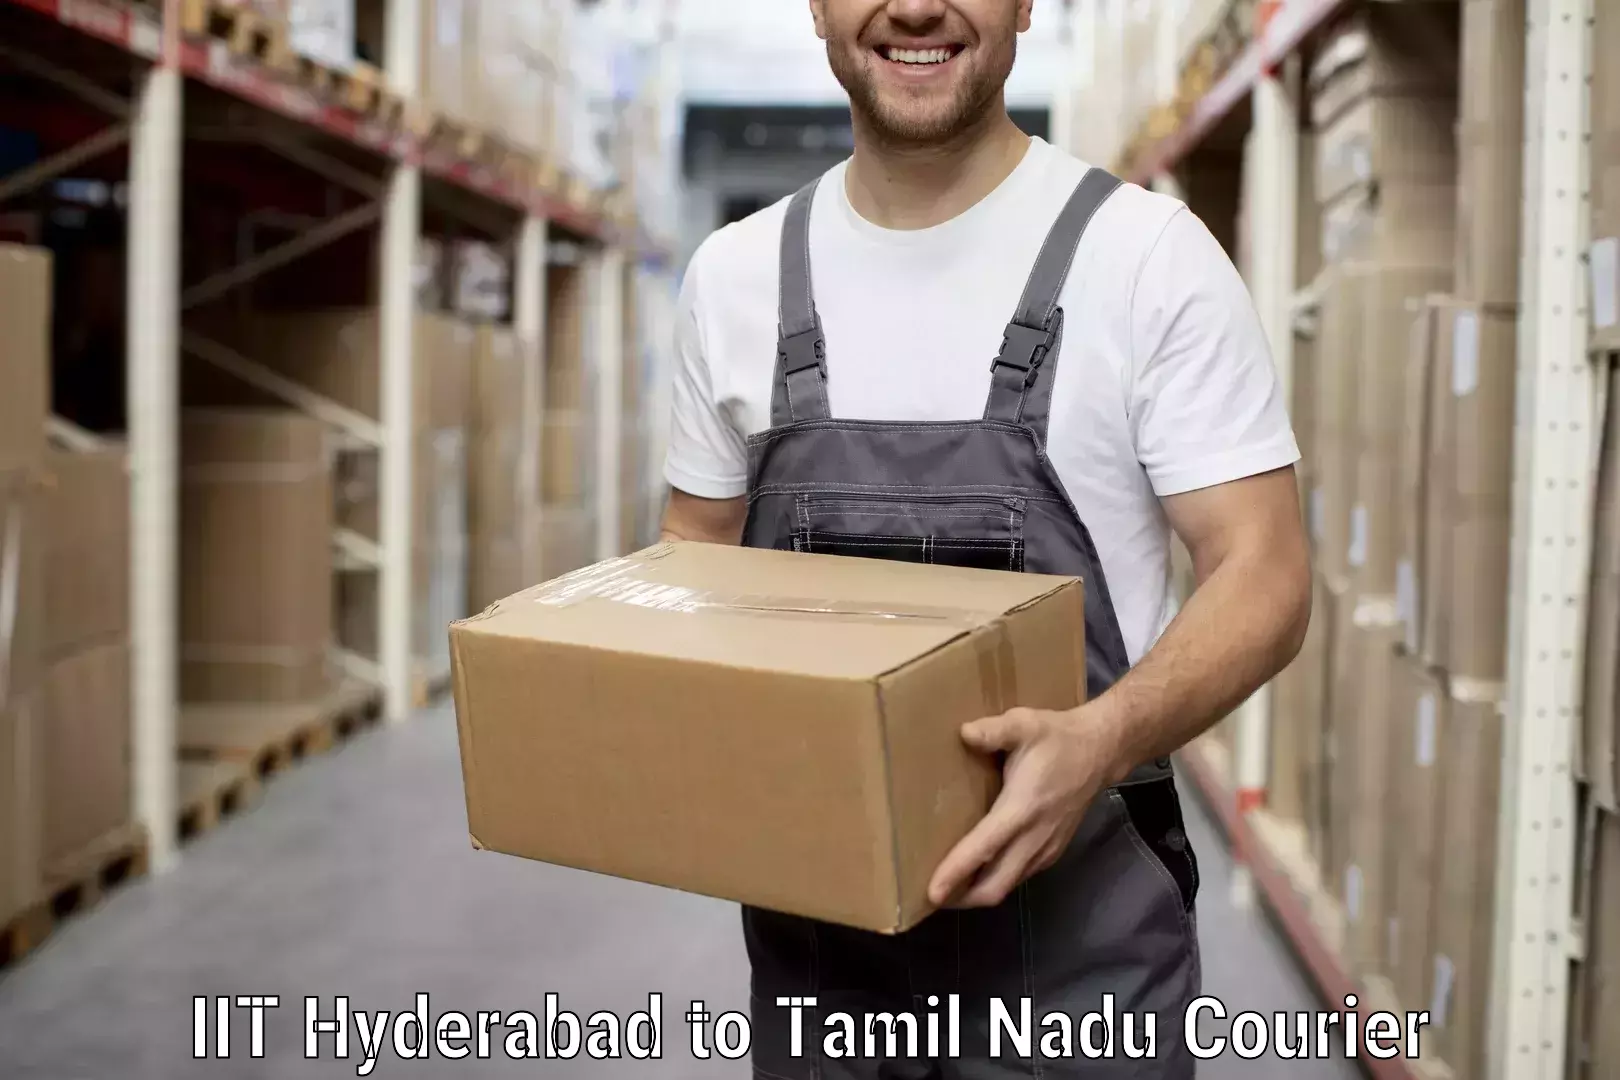 Quality moving company IIT Hyderabad to Ooty